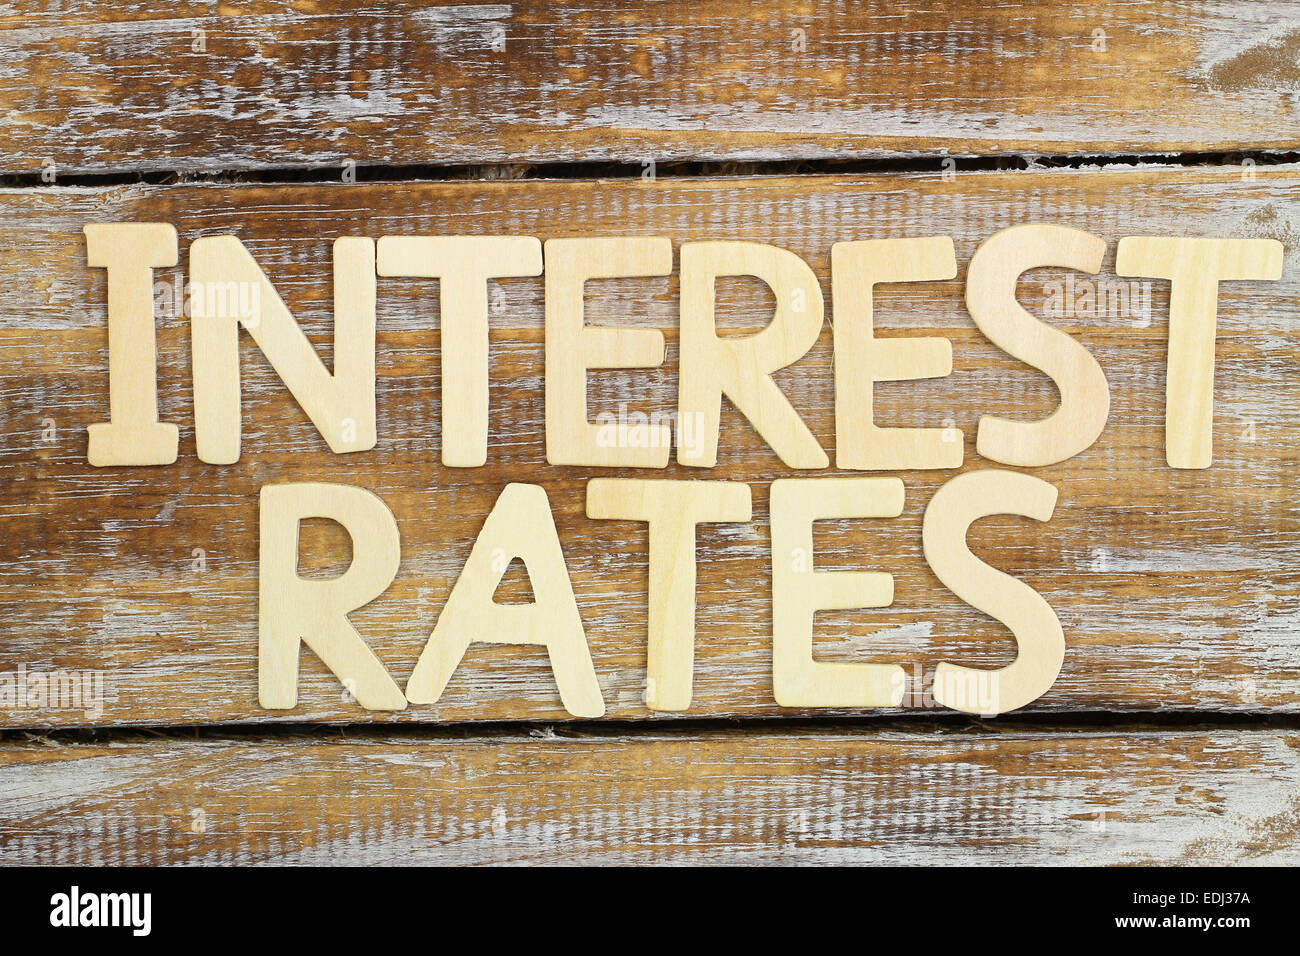 Interest rates written with wooden letters on rustic wooden surface Stock Photo